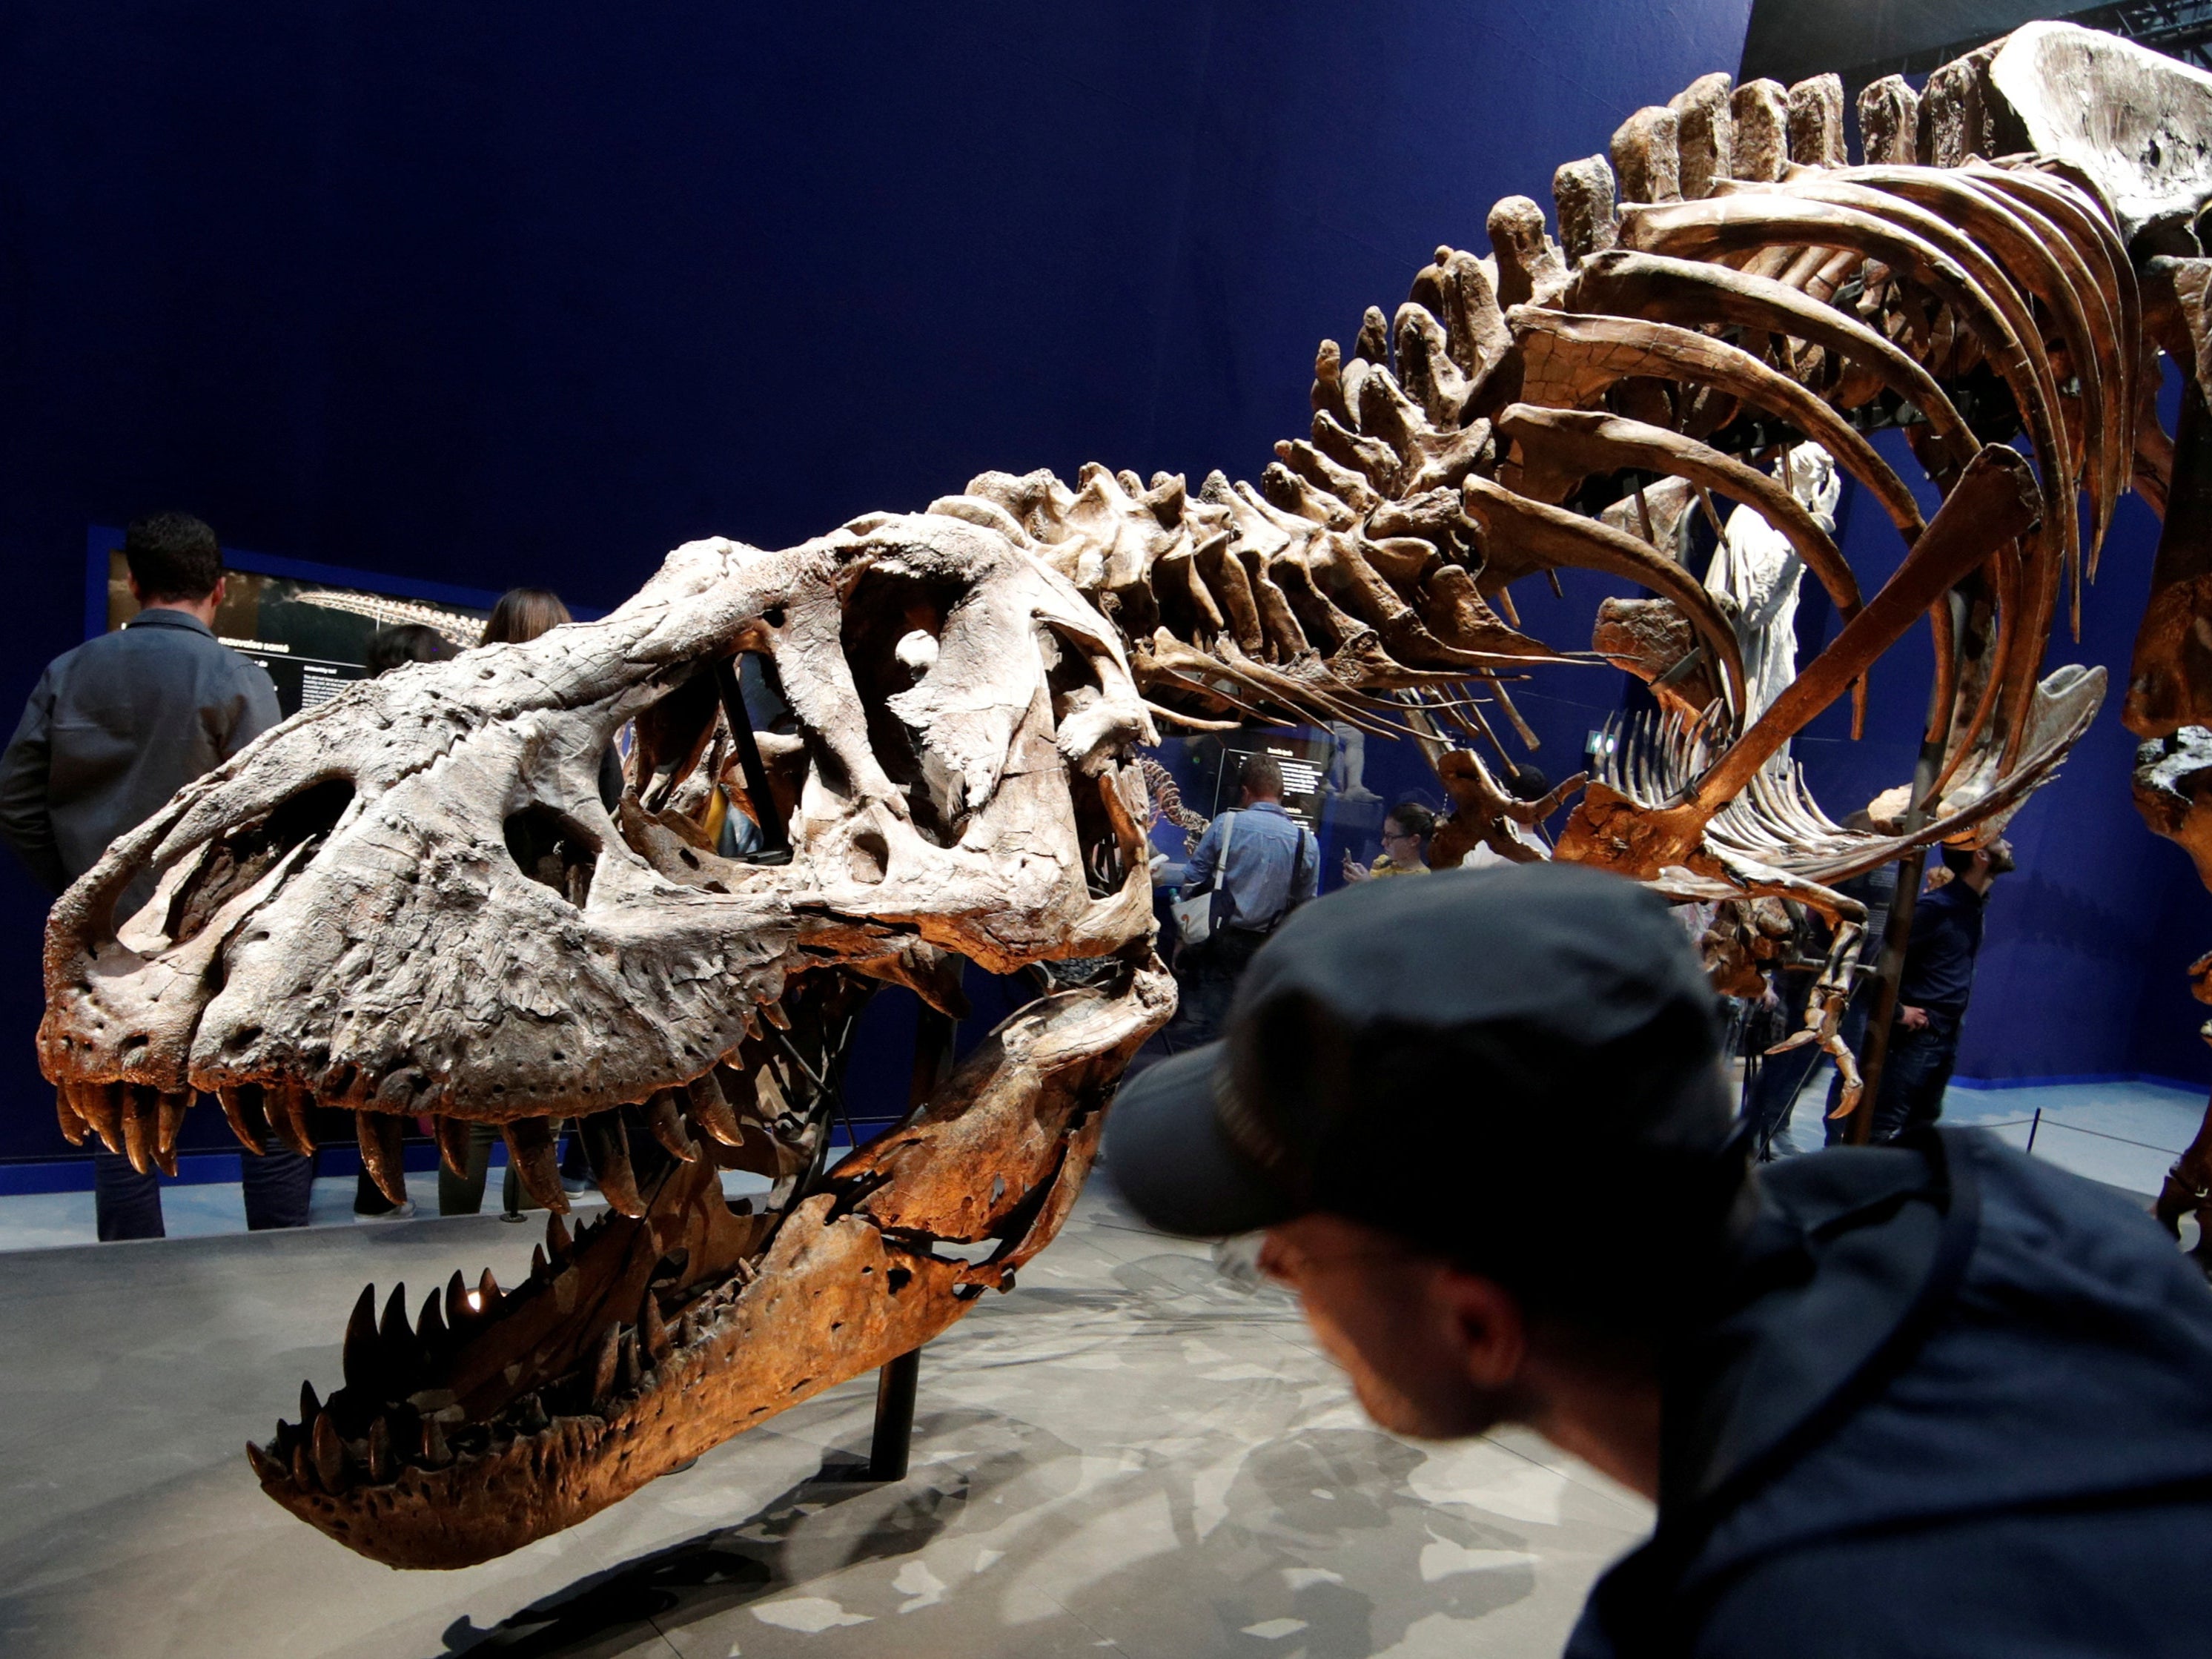 A 67 million year-old skeleton of a Tyrannosaurus rex pictured at the French National Museum of Natural History in Paris in 2018